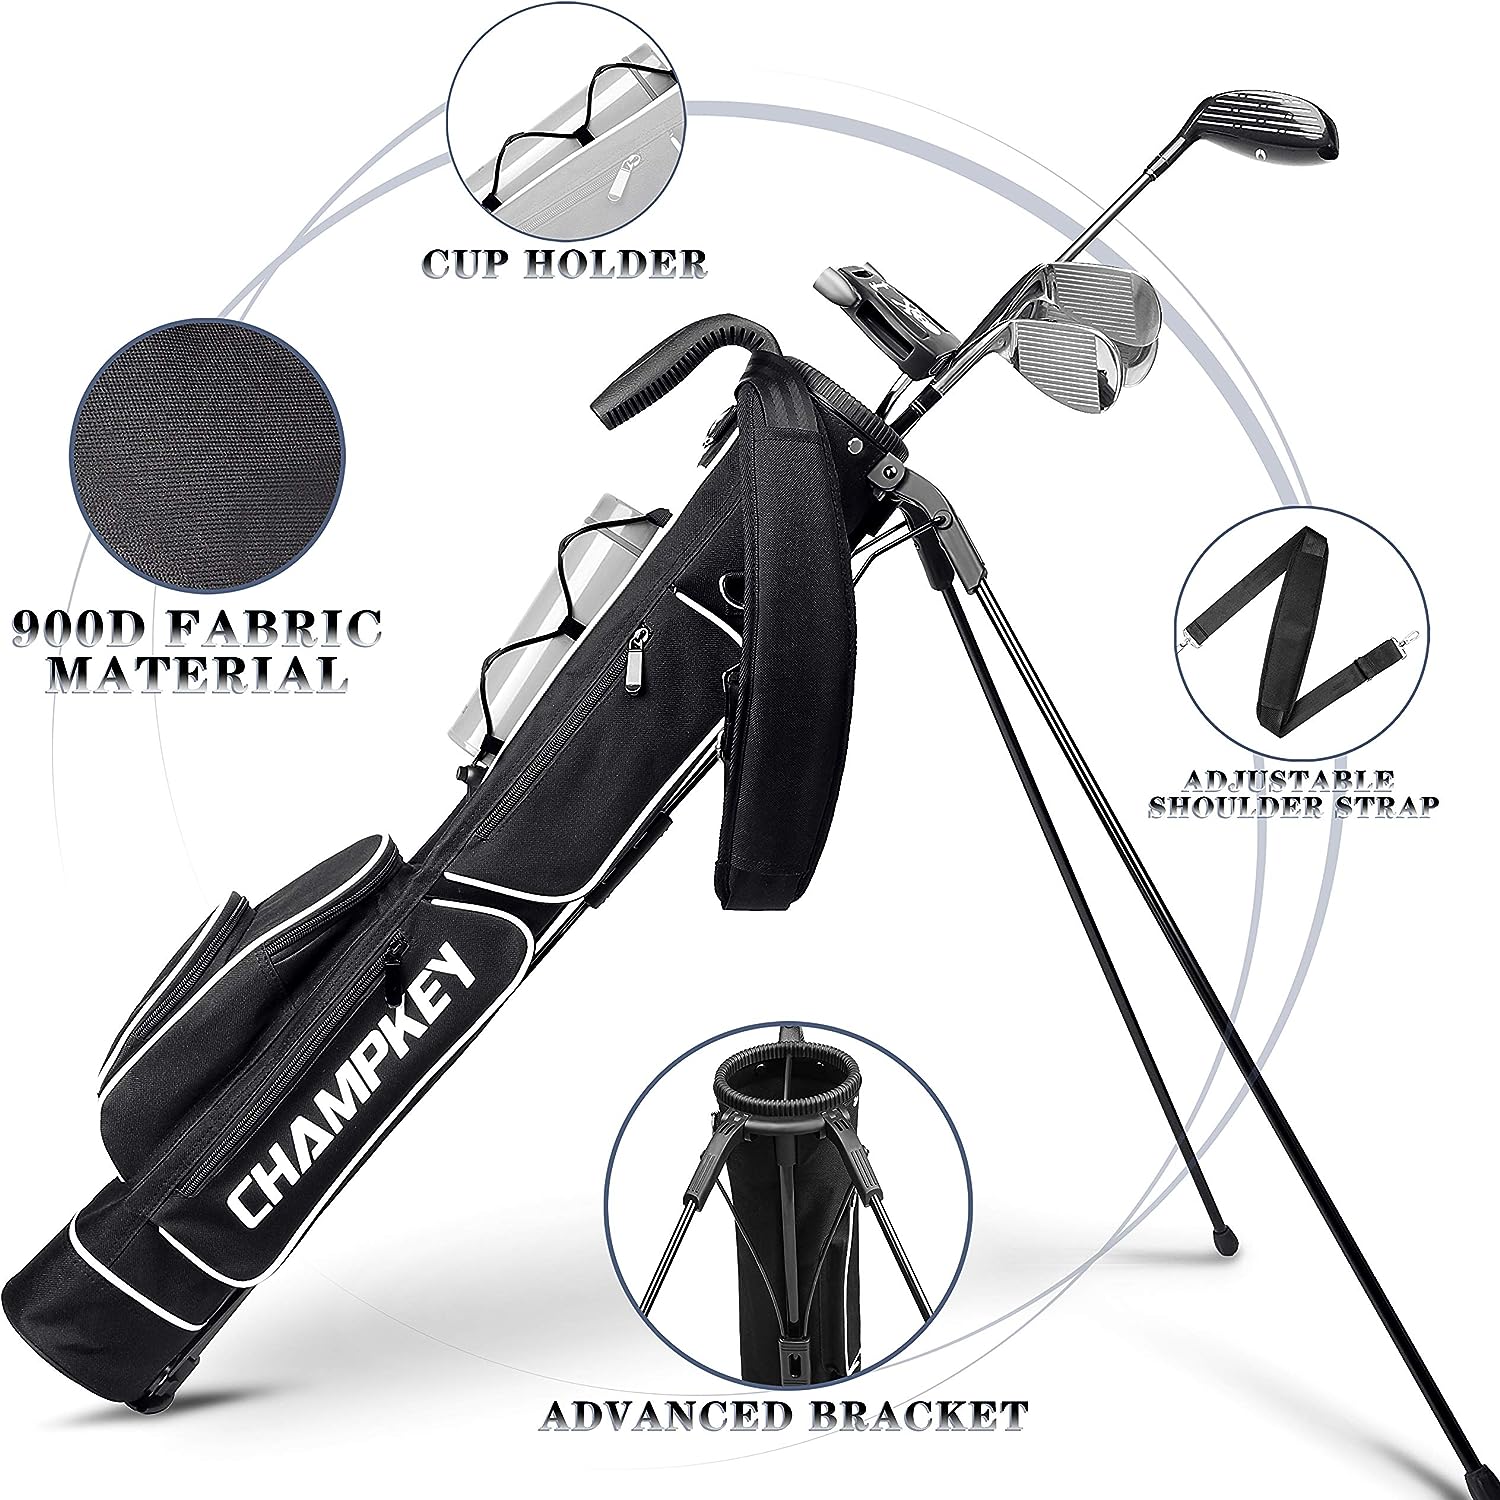 Professional Pitch Golf Bag Review